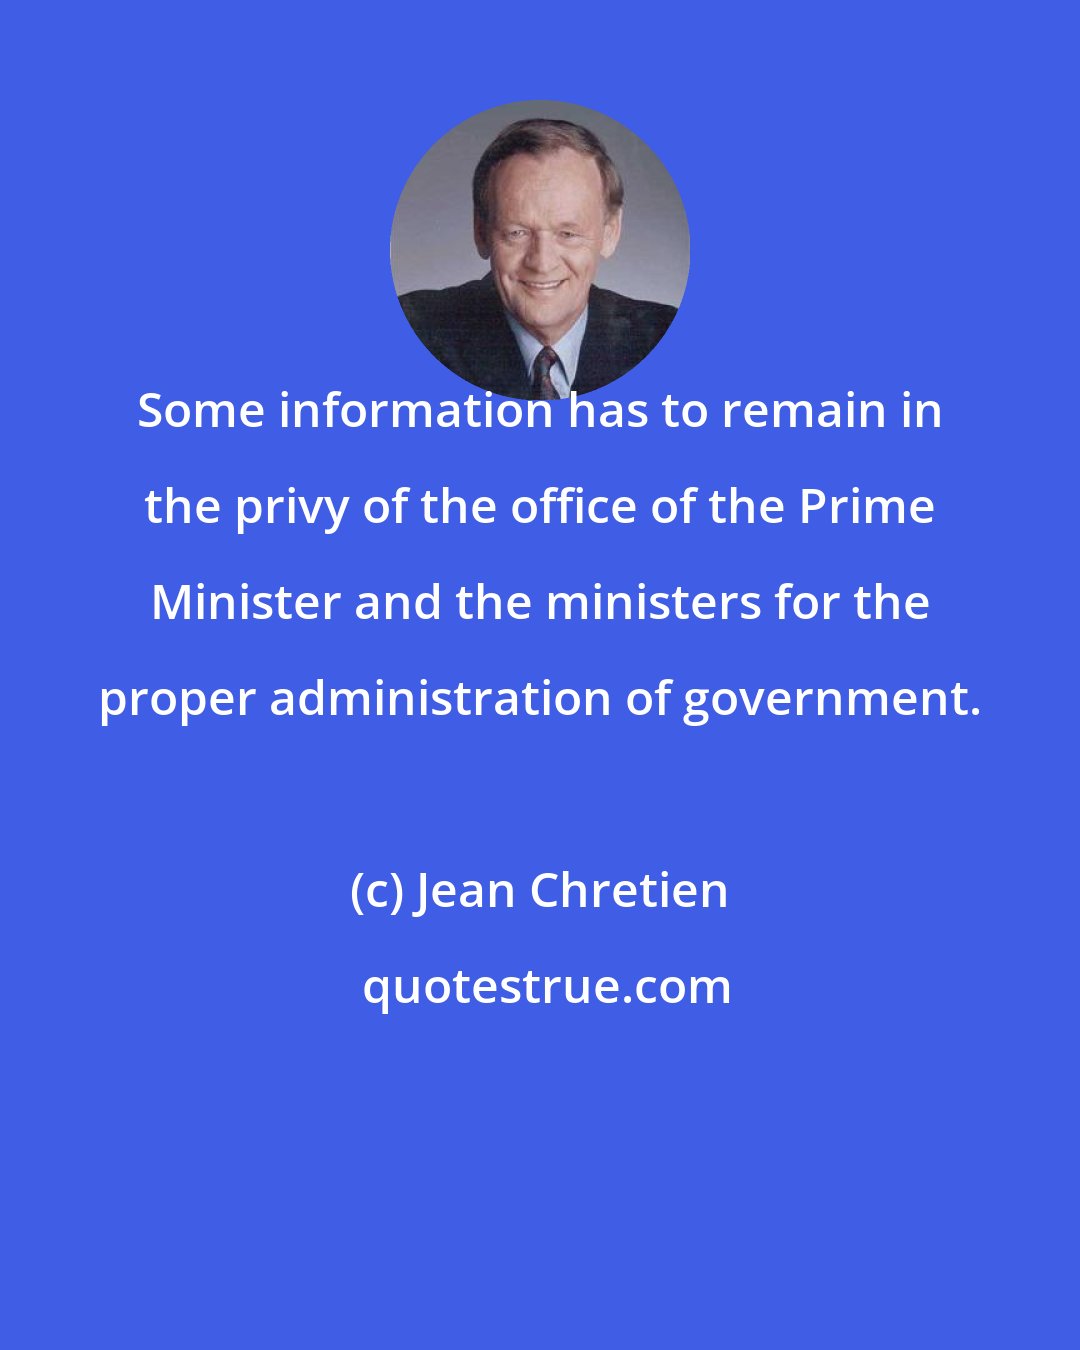 Jean Chretien: Some information has to remain in the privy of the office of the Prime Minister and the ministers for the proper administration of government.